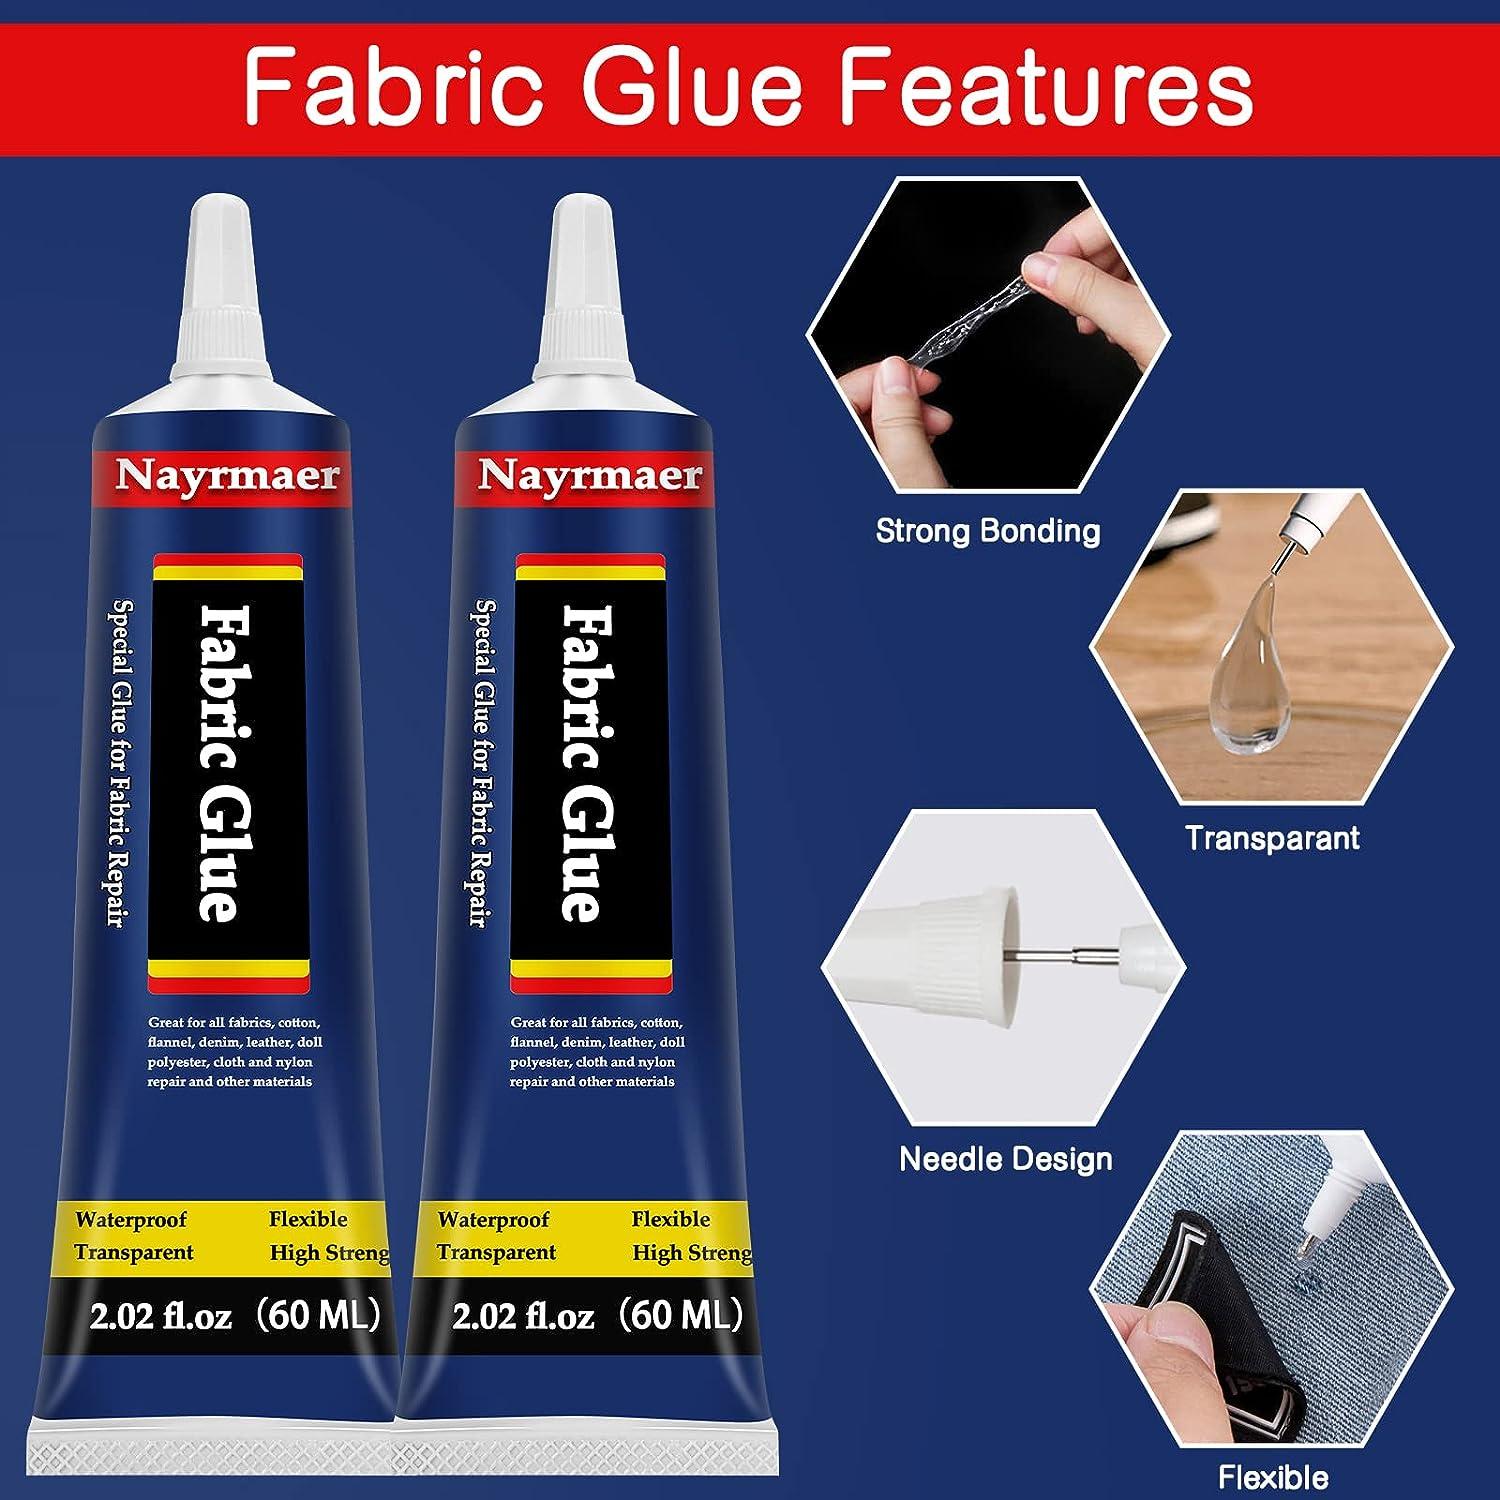  Fabric Glue, Permanent Clear Washable Clothing Glue for All  Fabrics, Cotton, Flannel, Denim, Leather, Polyester, Doll Repair, 24 Hours  Dry and Waterproof (Fabric glue-002) : Arts, Crafts & Sewing